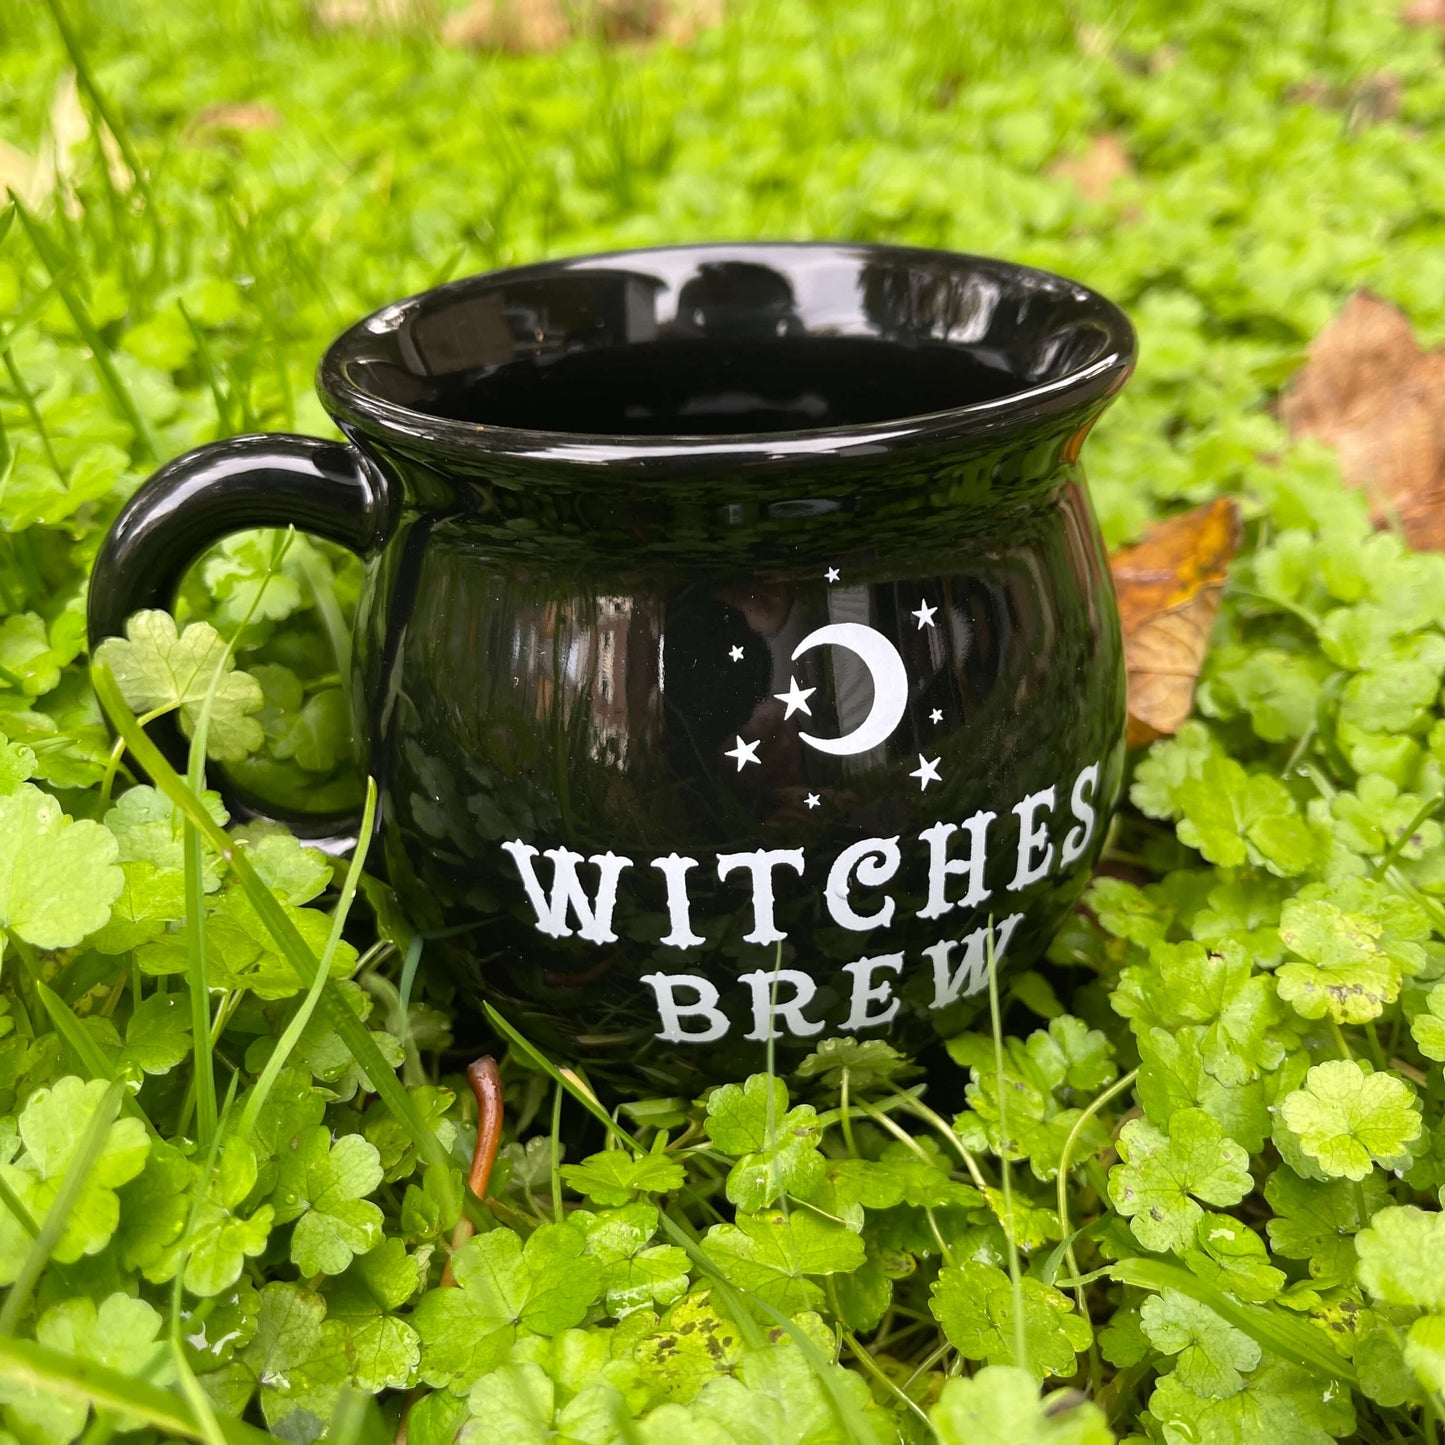 Black Cauldron shaped mug with "Witches Brew" in white text sitting on grass.